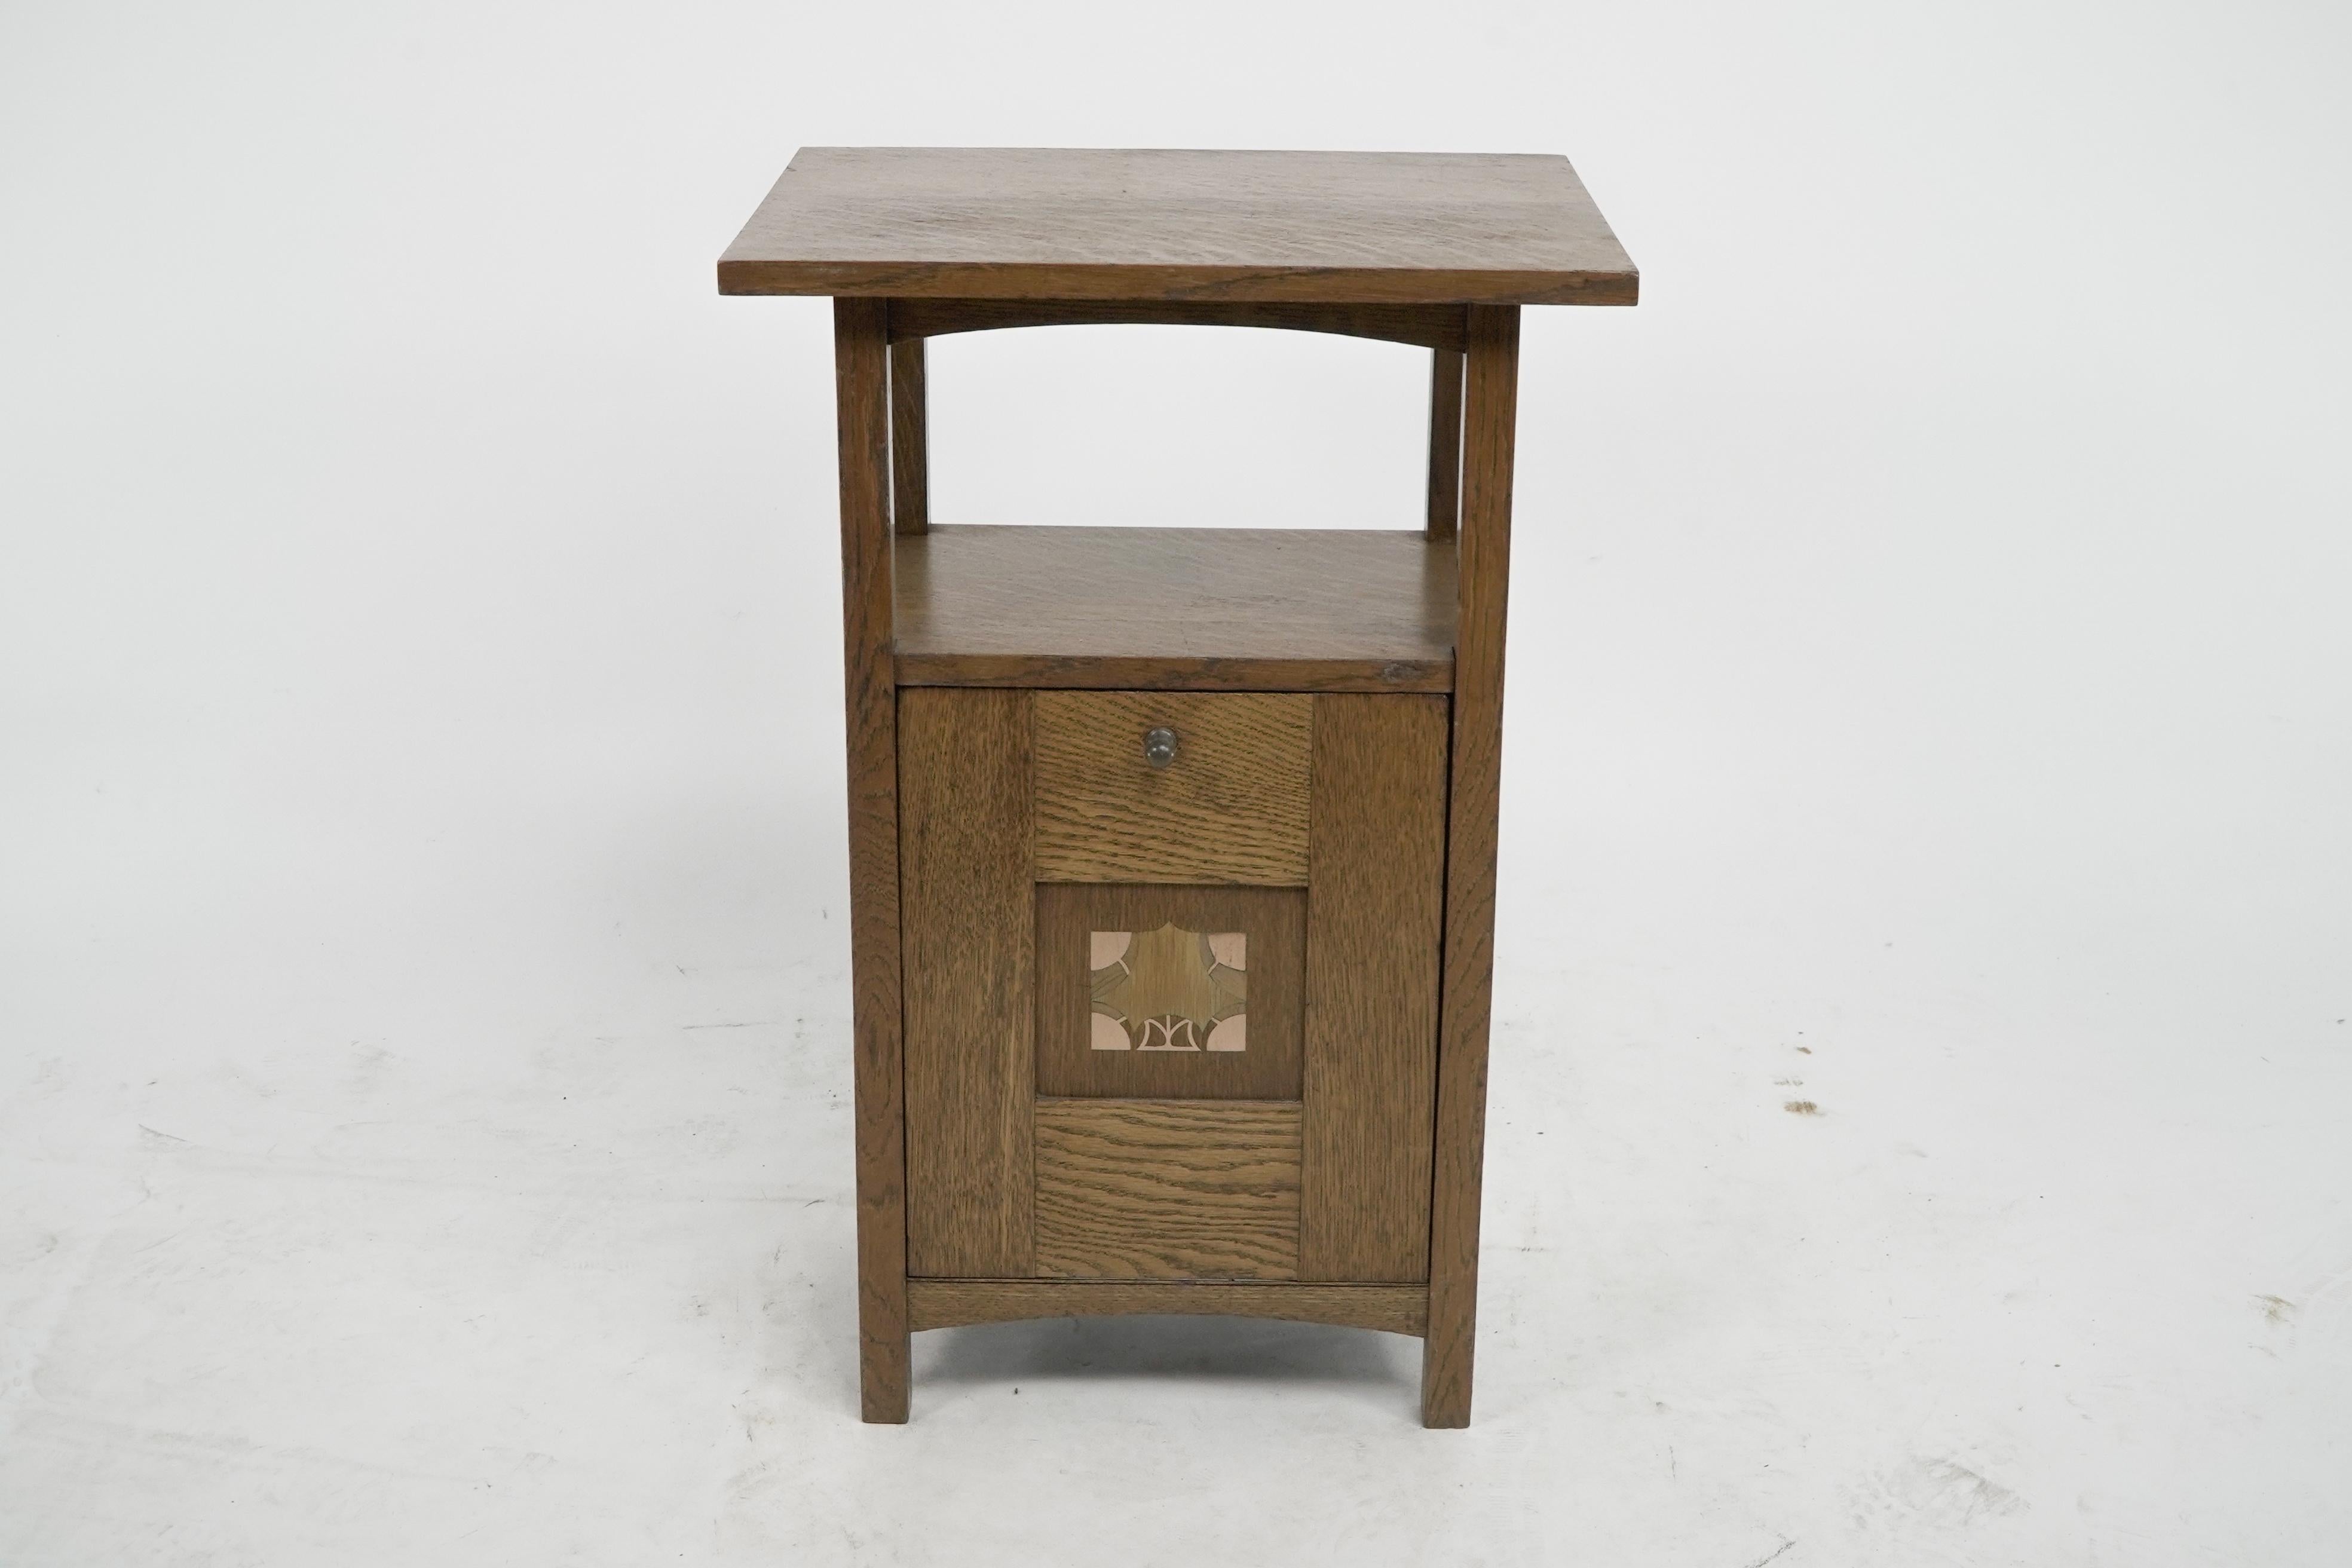 George Montague Ellwood. 
A rare Arts and Crafts oak purdonium made by J S Henry. 
A set of chairs also designed by G M Ellwood with similar inlays were exhibited at The Dublin Museum Exhibition held in 1905.